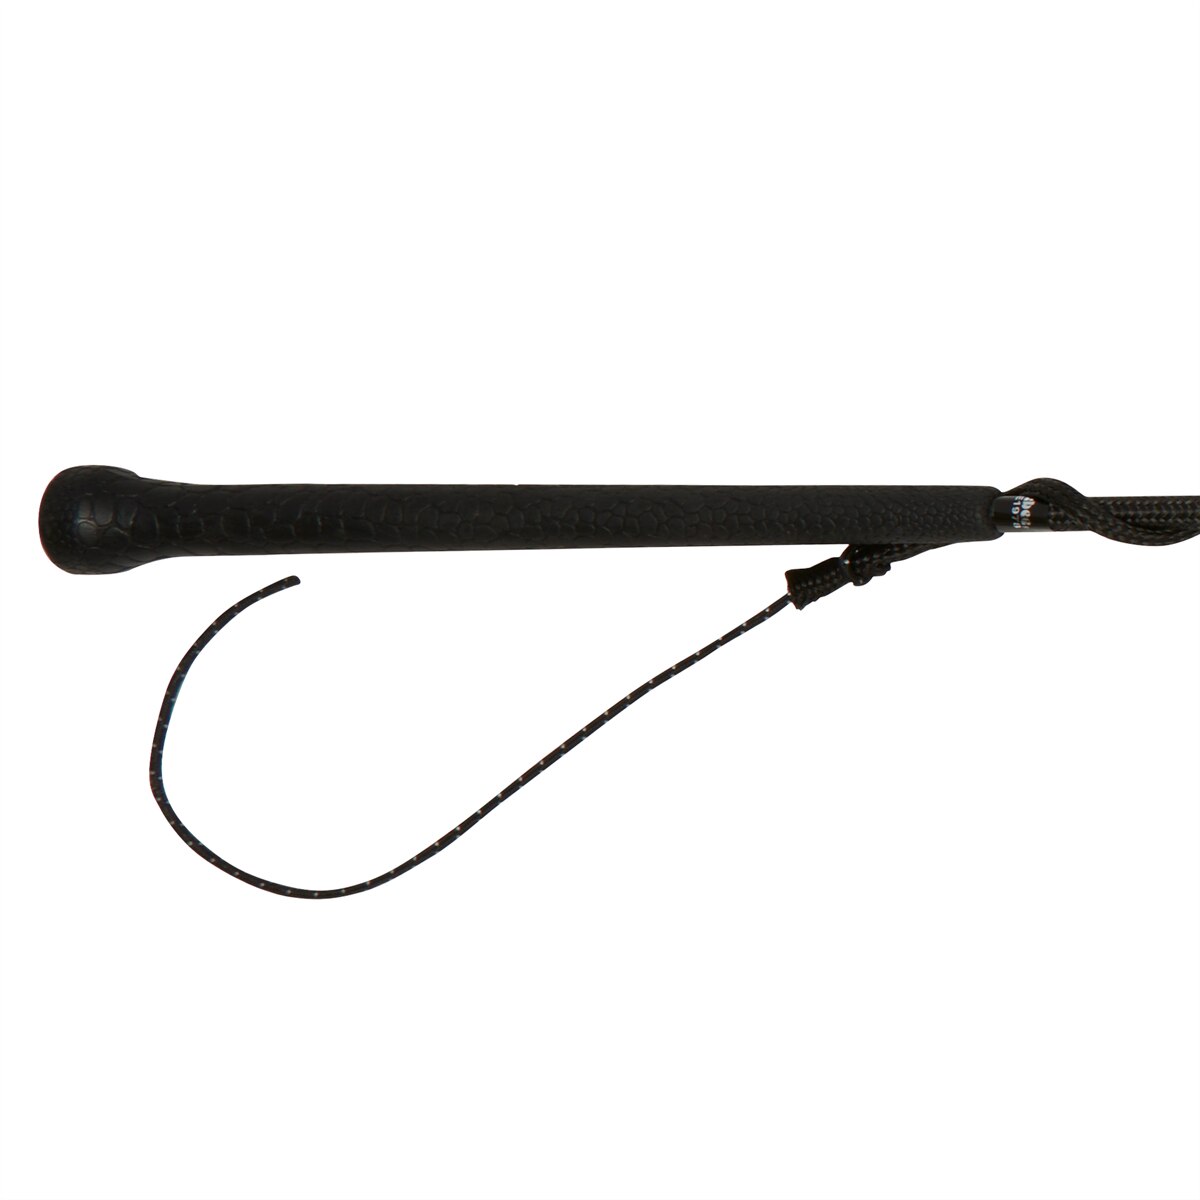 JA Horse Lunging Whip Longier Lunging 180/200 cm Separable Detachable Two Parts for Screwing Together 200 cm, Black 